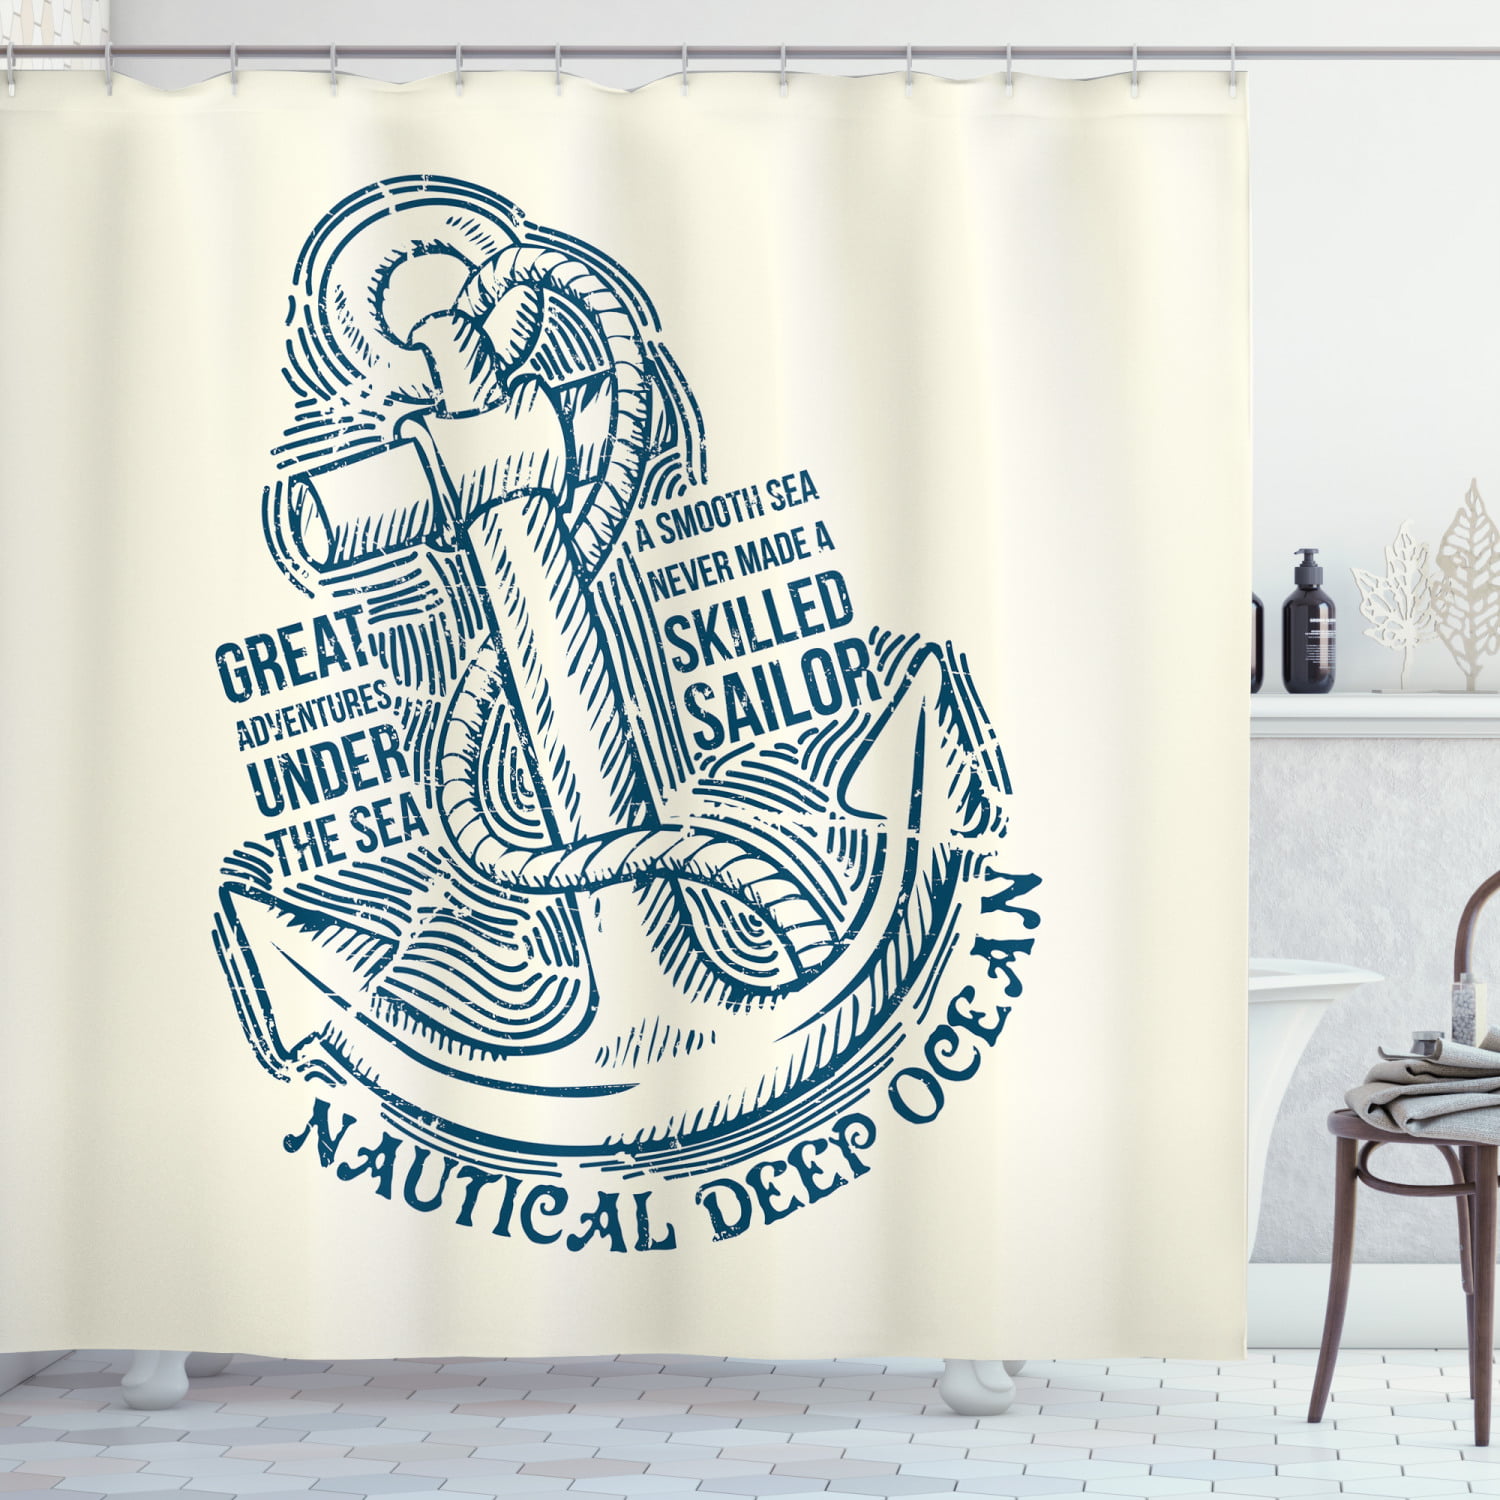 Details about  / Vintage Shower Curtain Nautical Pirate Skull Print for Bathroom